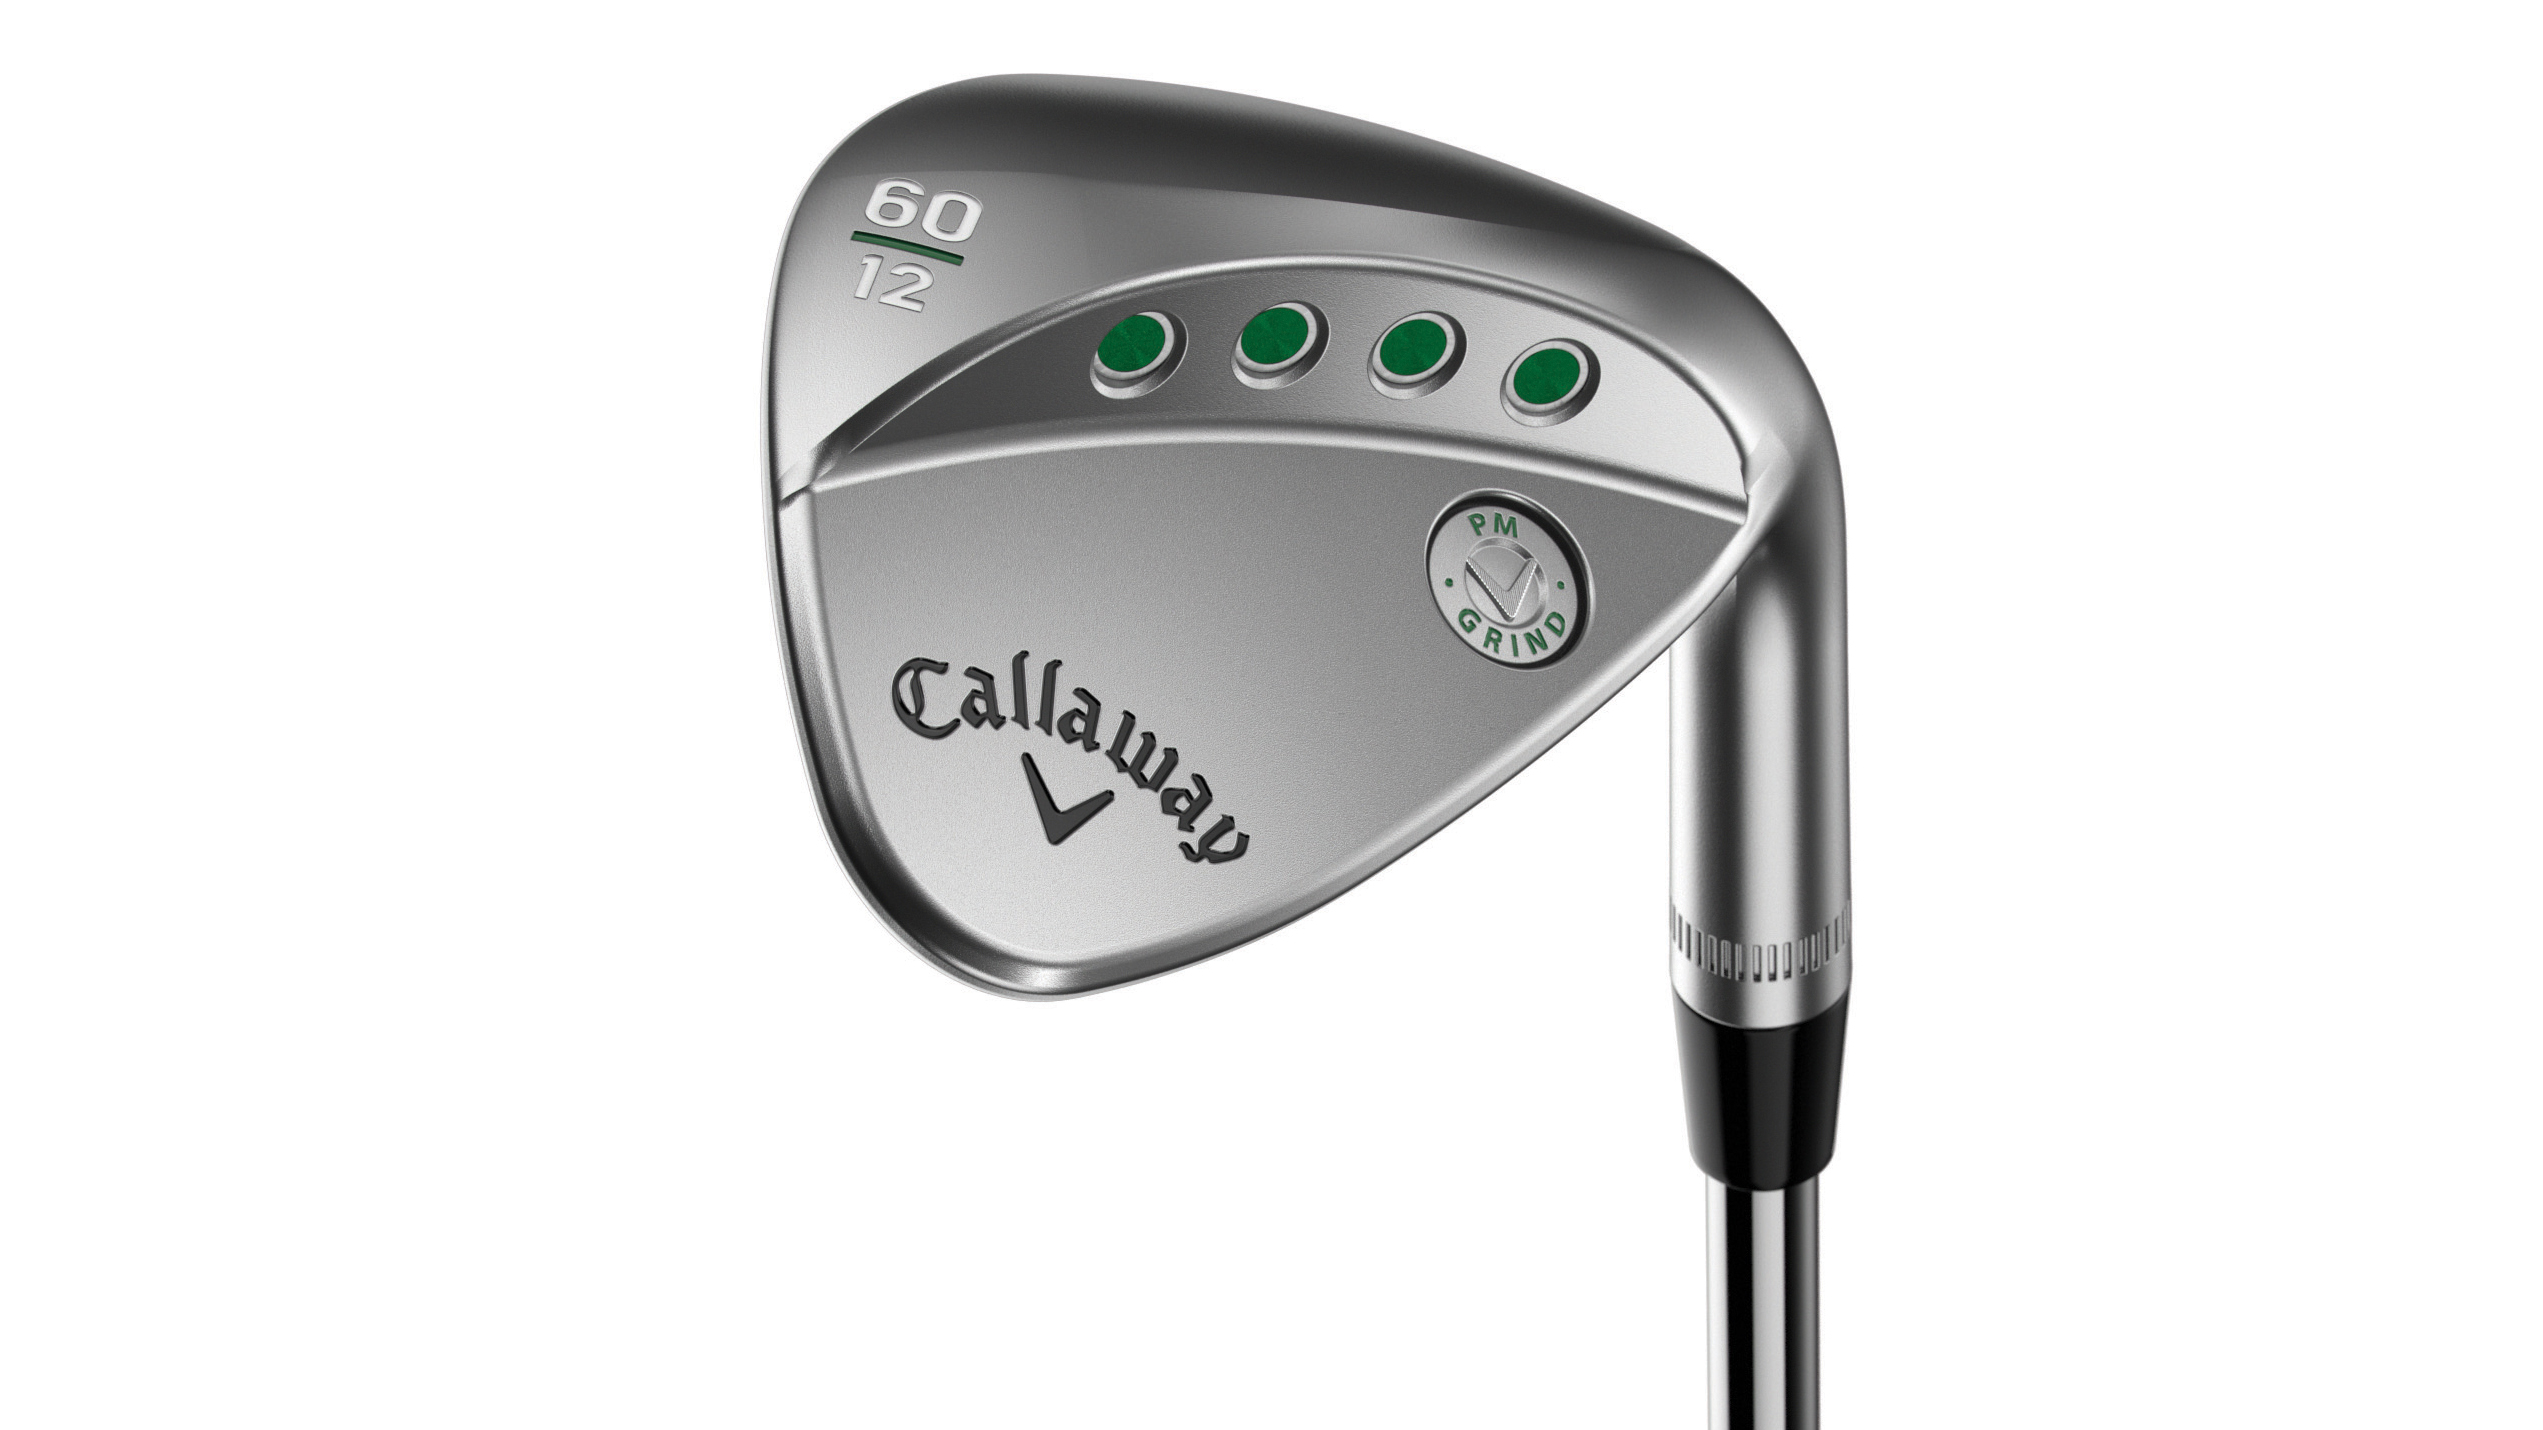 best sand wedge for bunkers